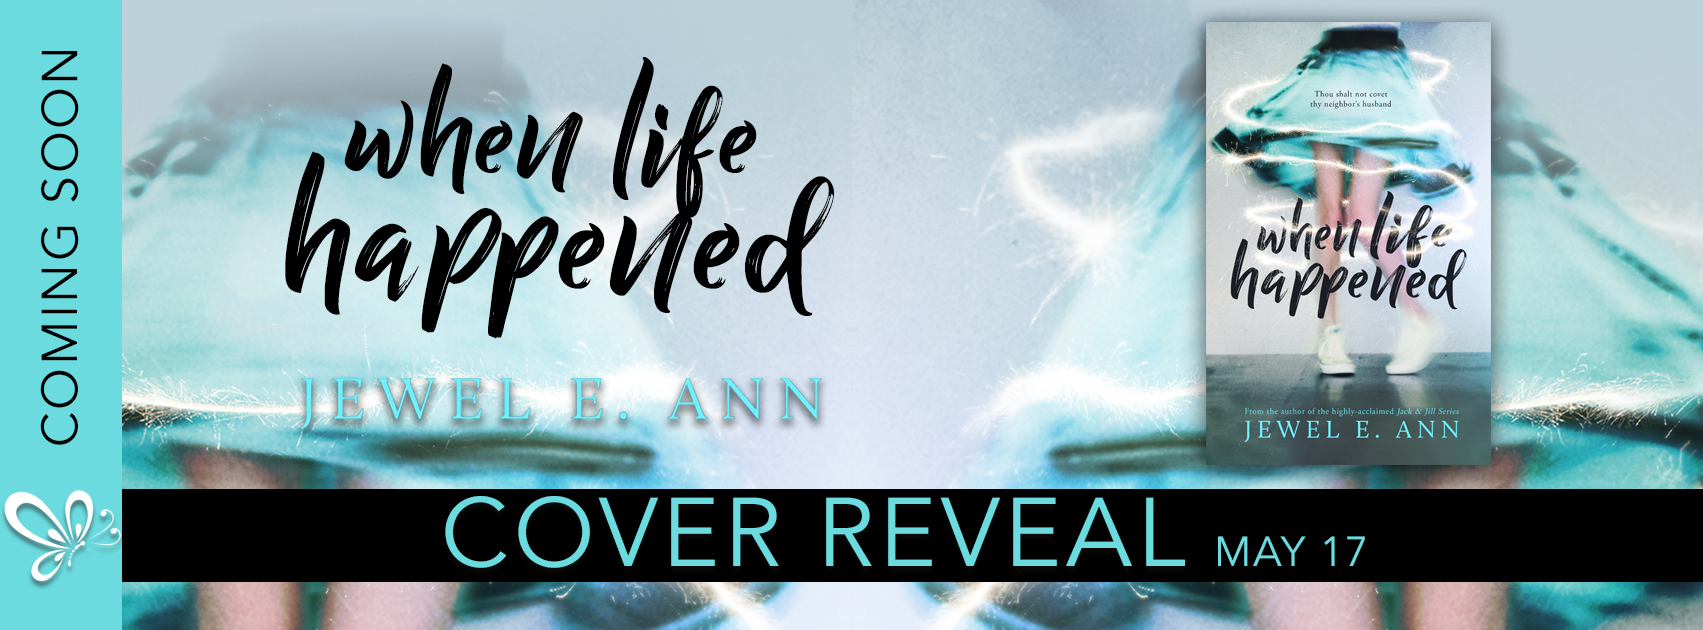 When Life Happened cover reveal banner